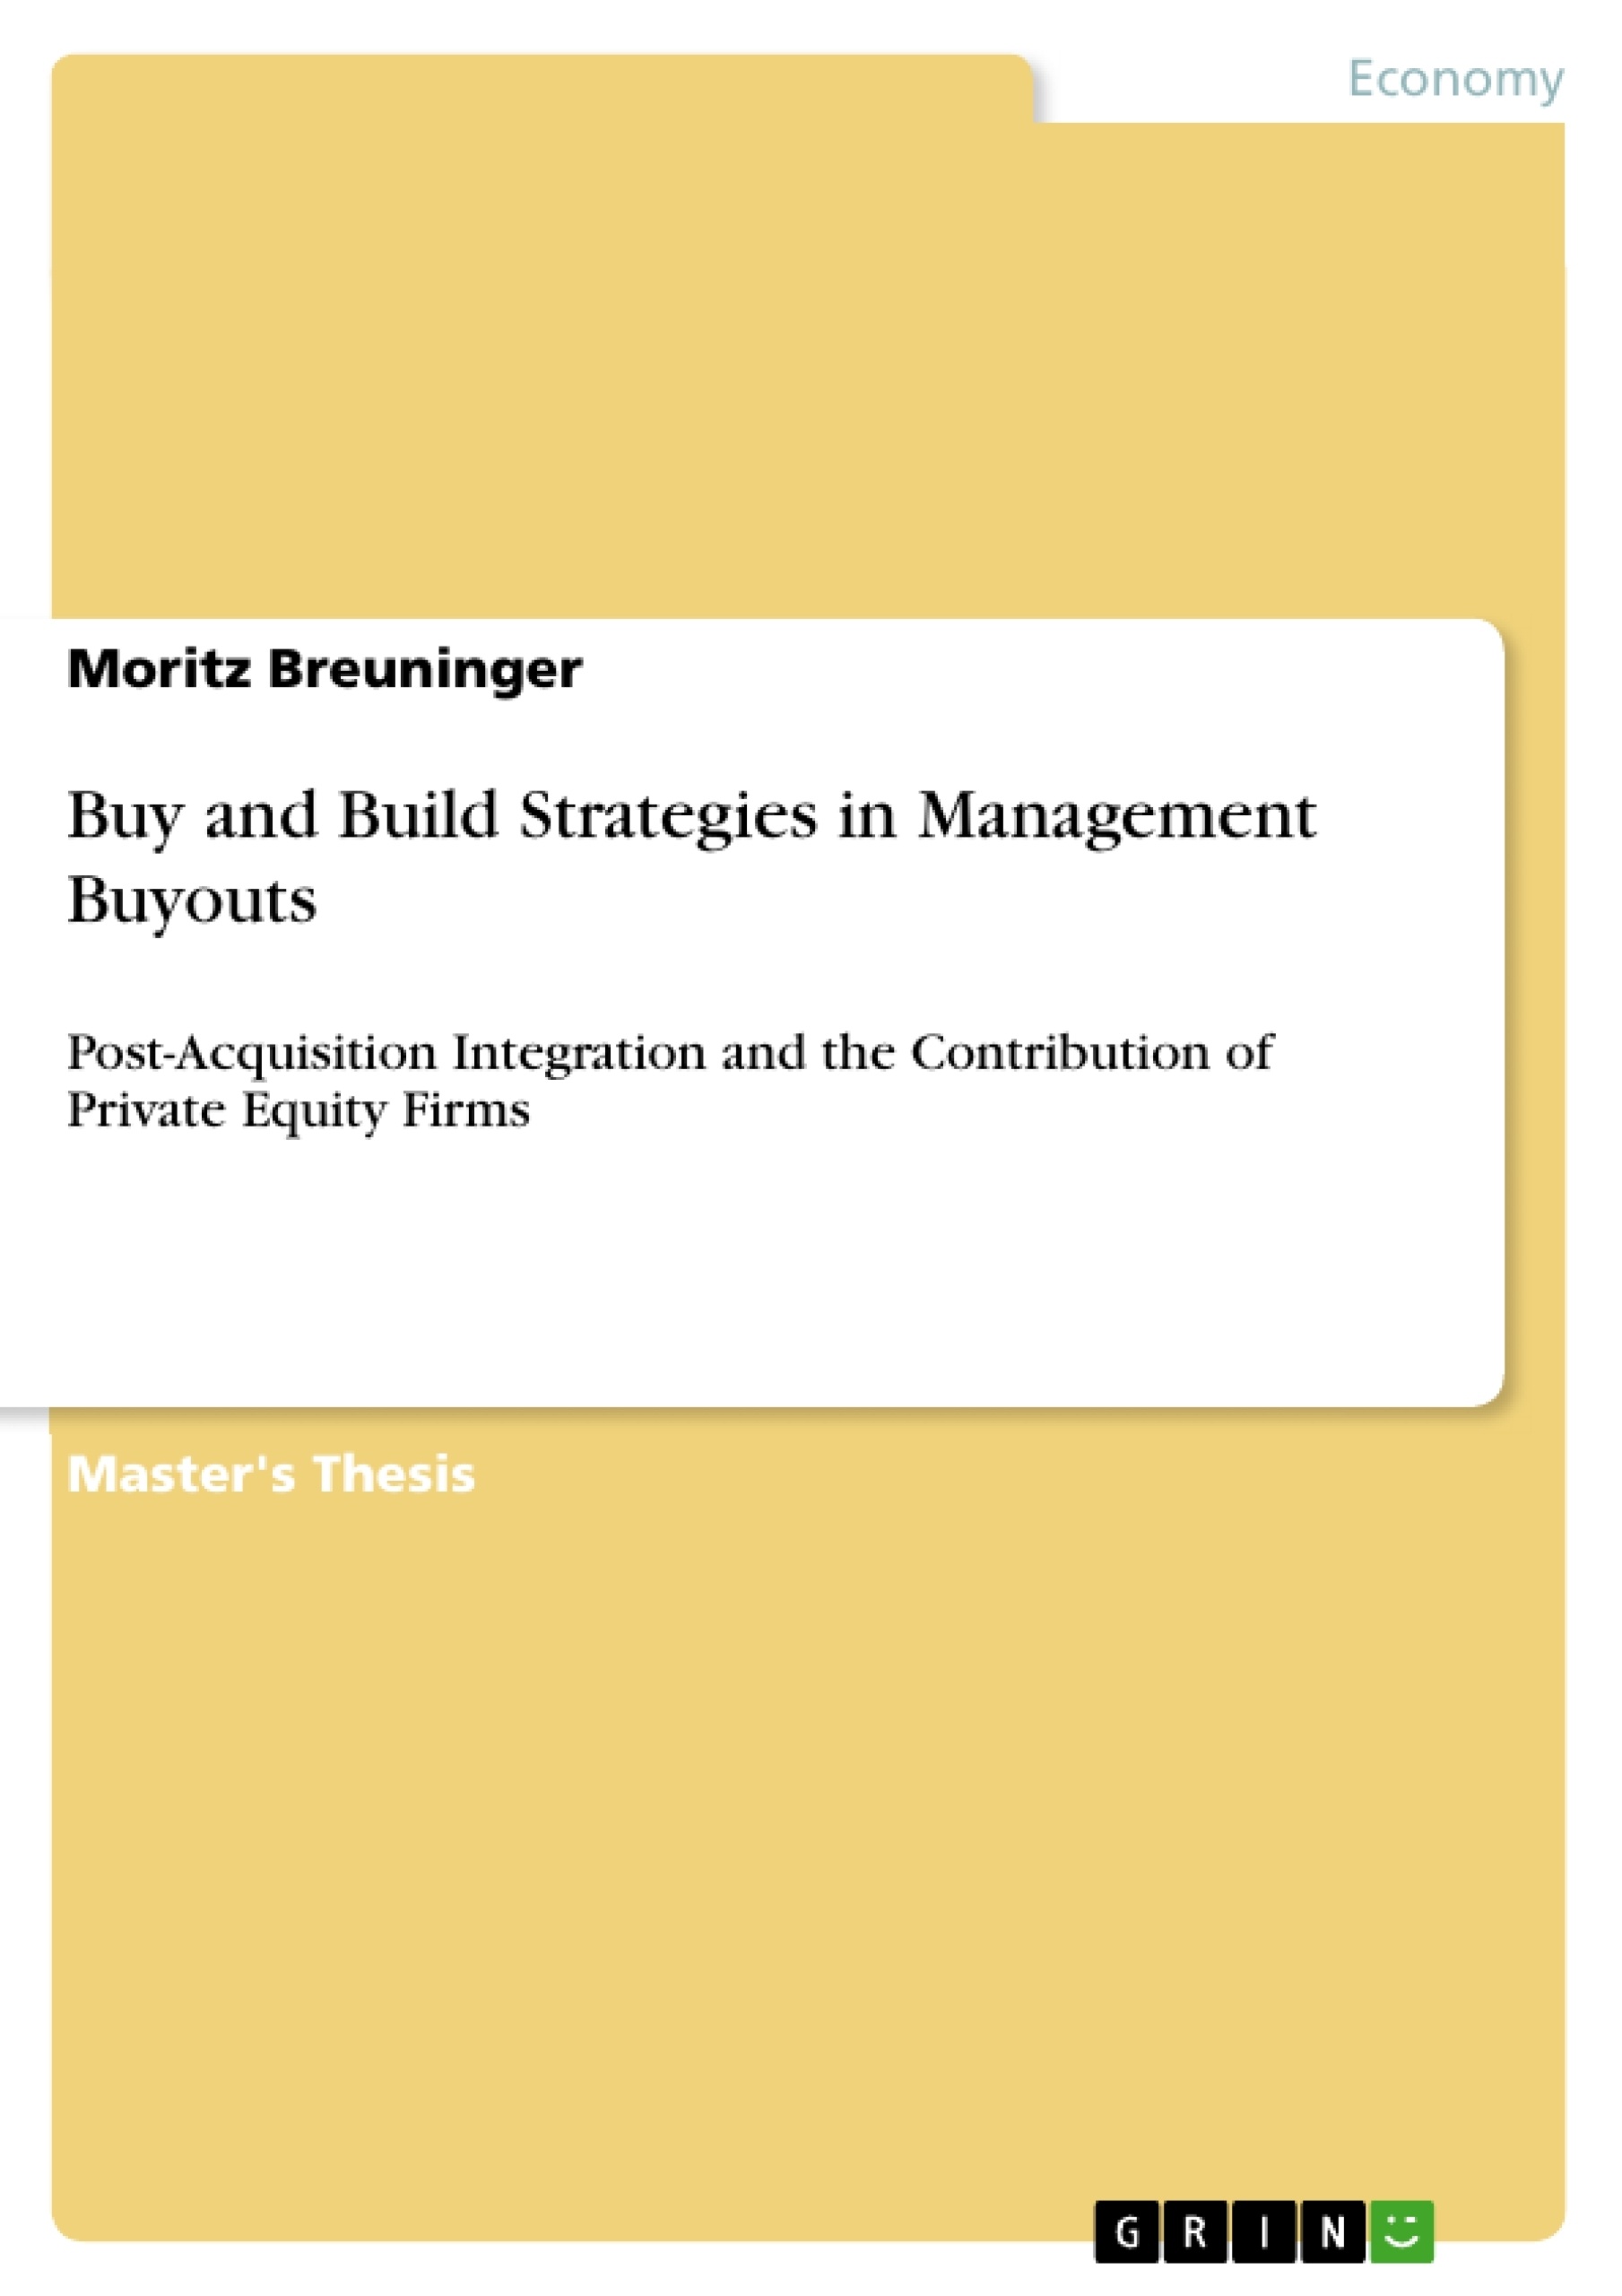 Titre: Buy and Build Strategies in Management Buyouts